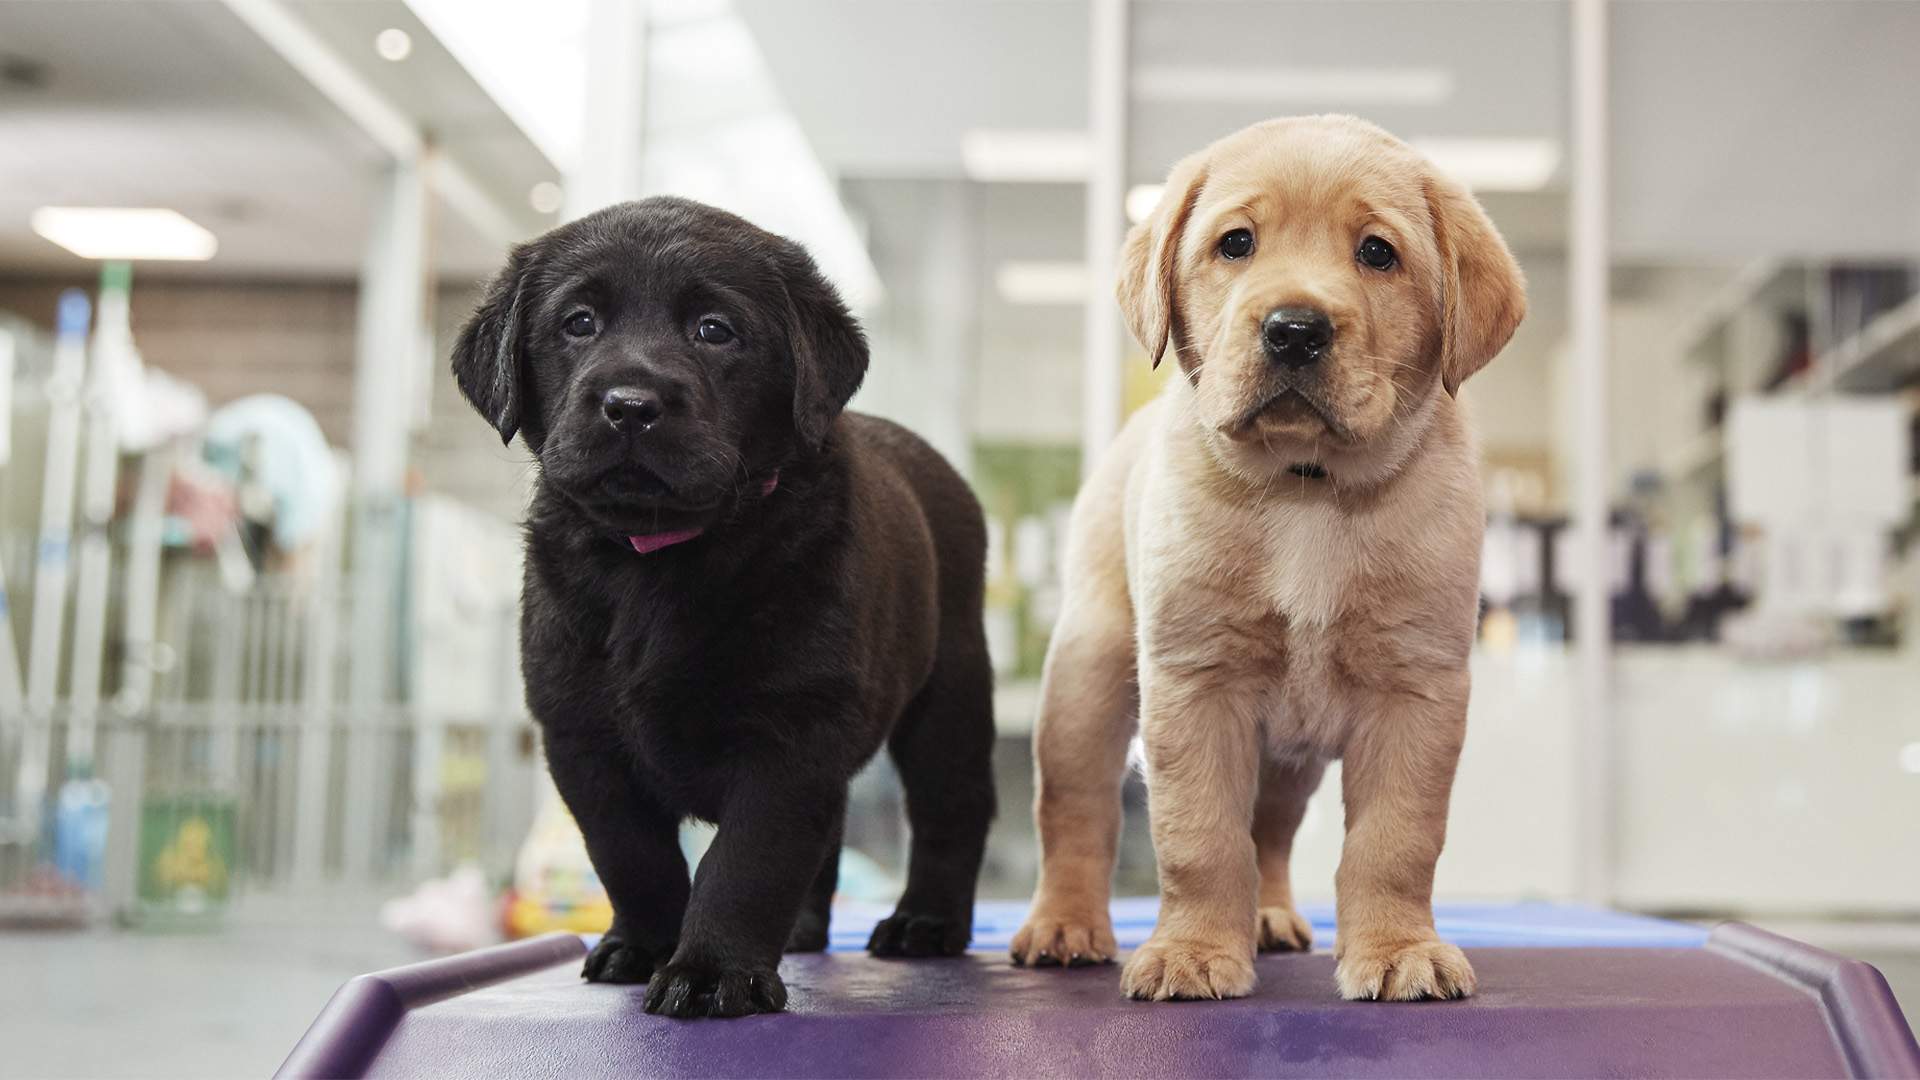 Seeing Eye Dogs Australia Wants You to Look After These Fresh New Pups